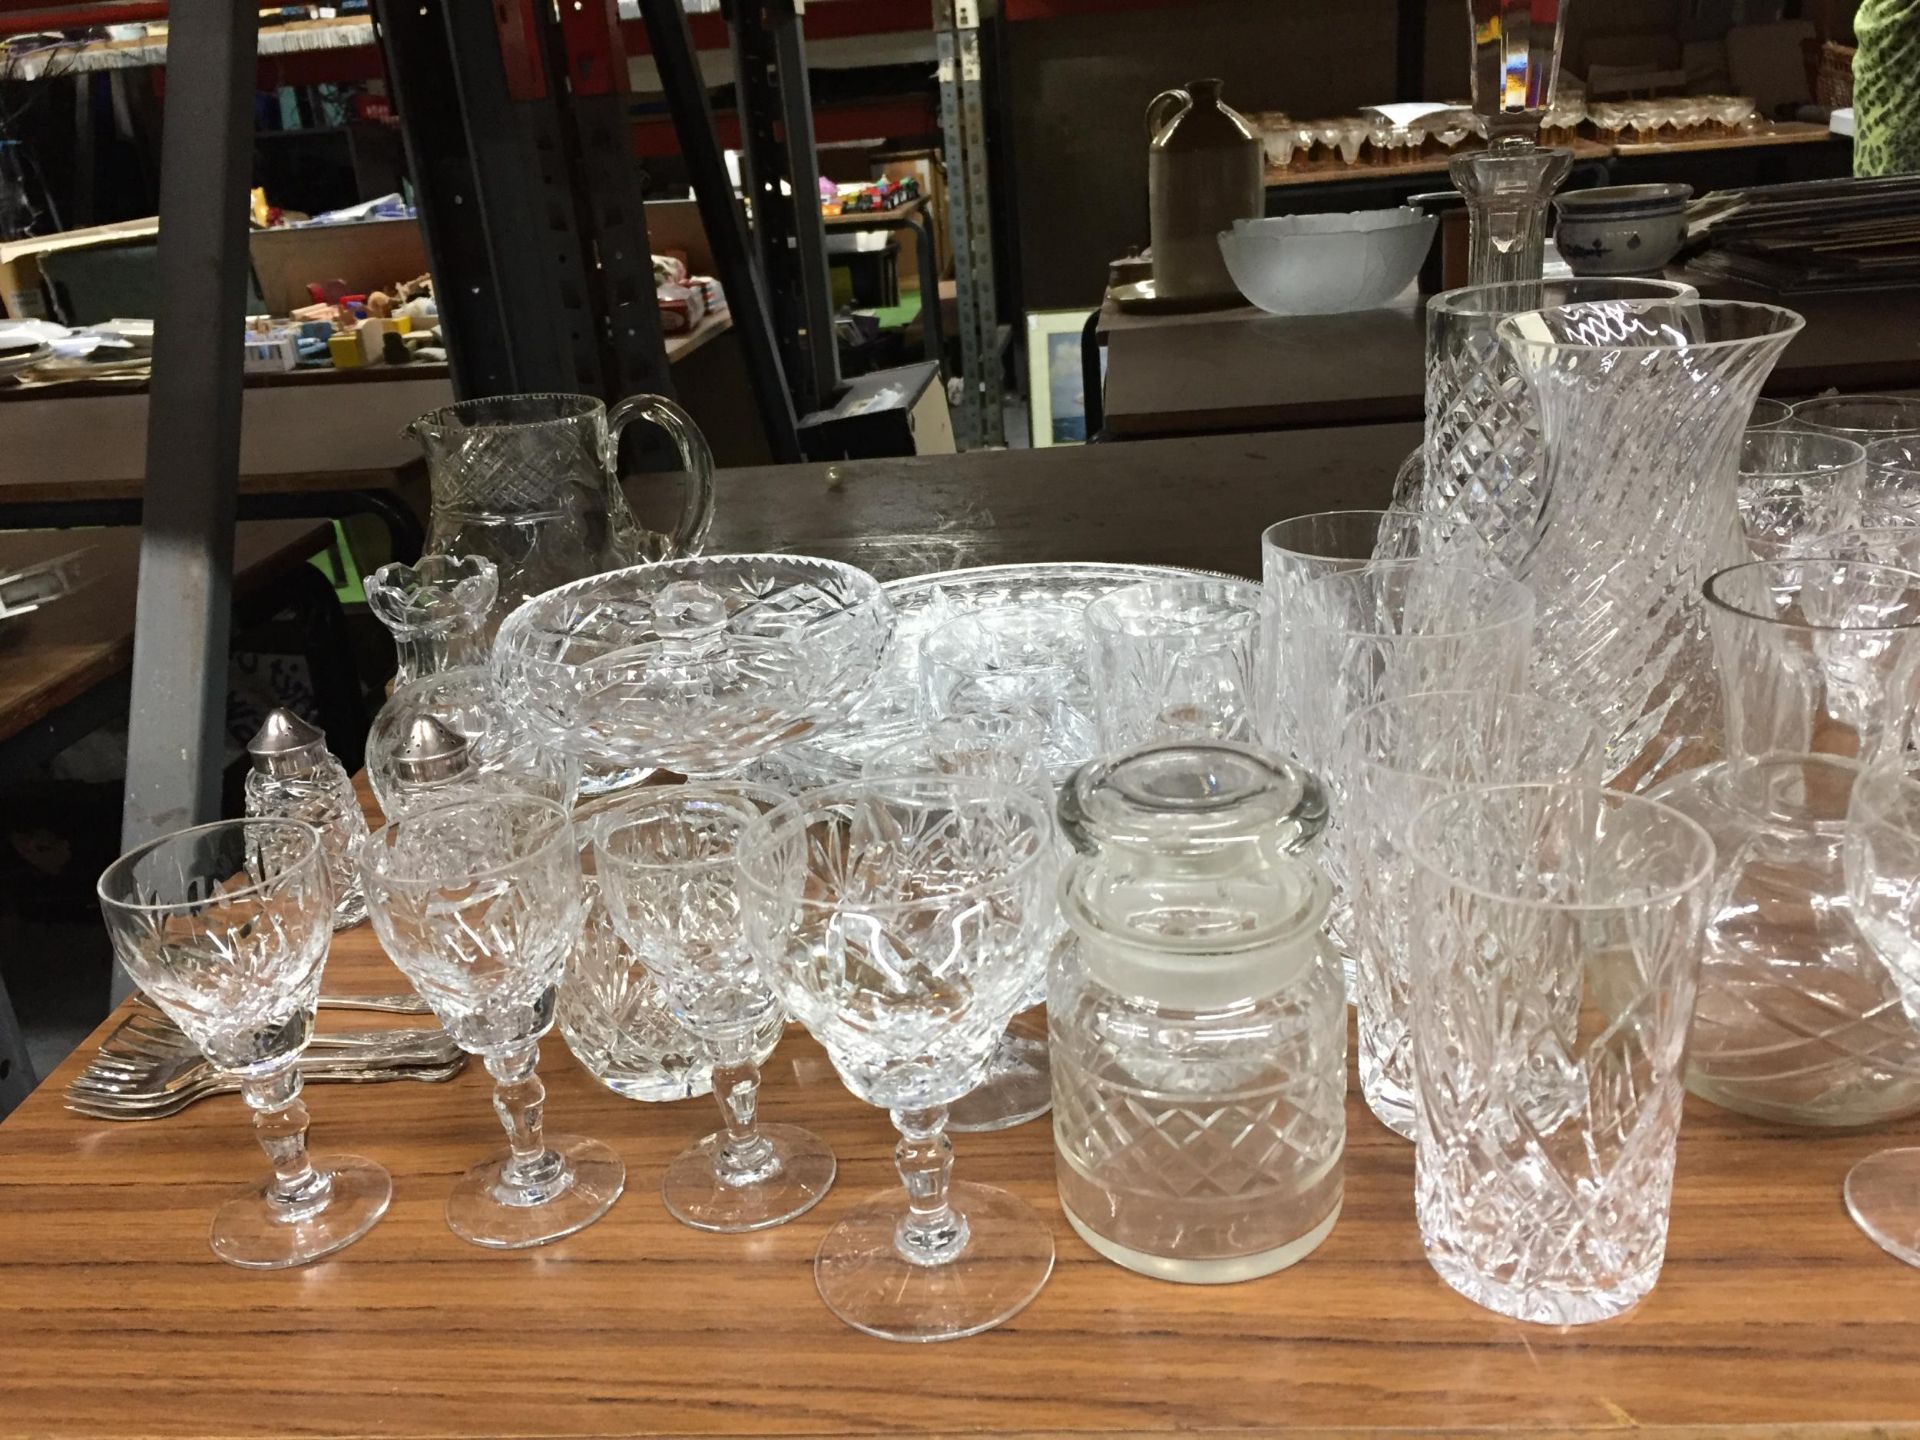 A LARGE COLLECTION OF CUT GLASS ITEMS, DRINKING GLASSES ETC - Image 3 of 4